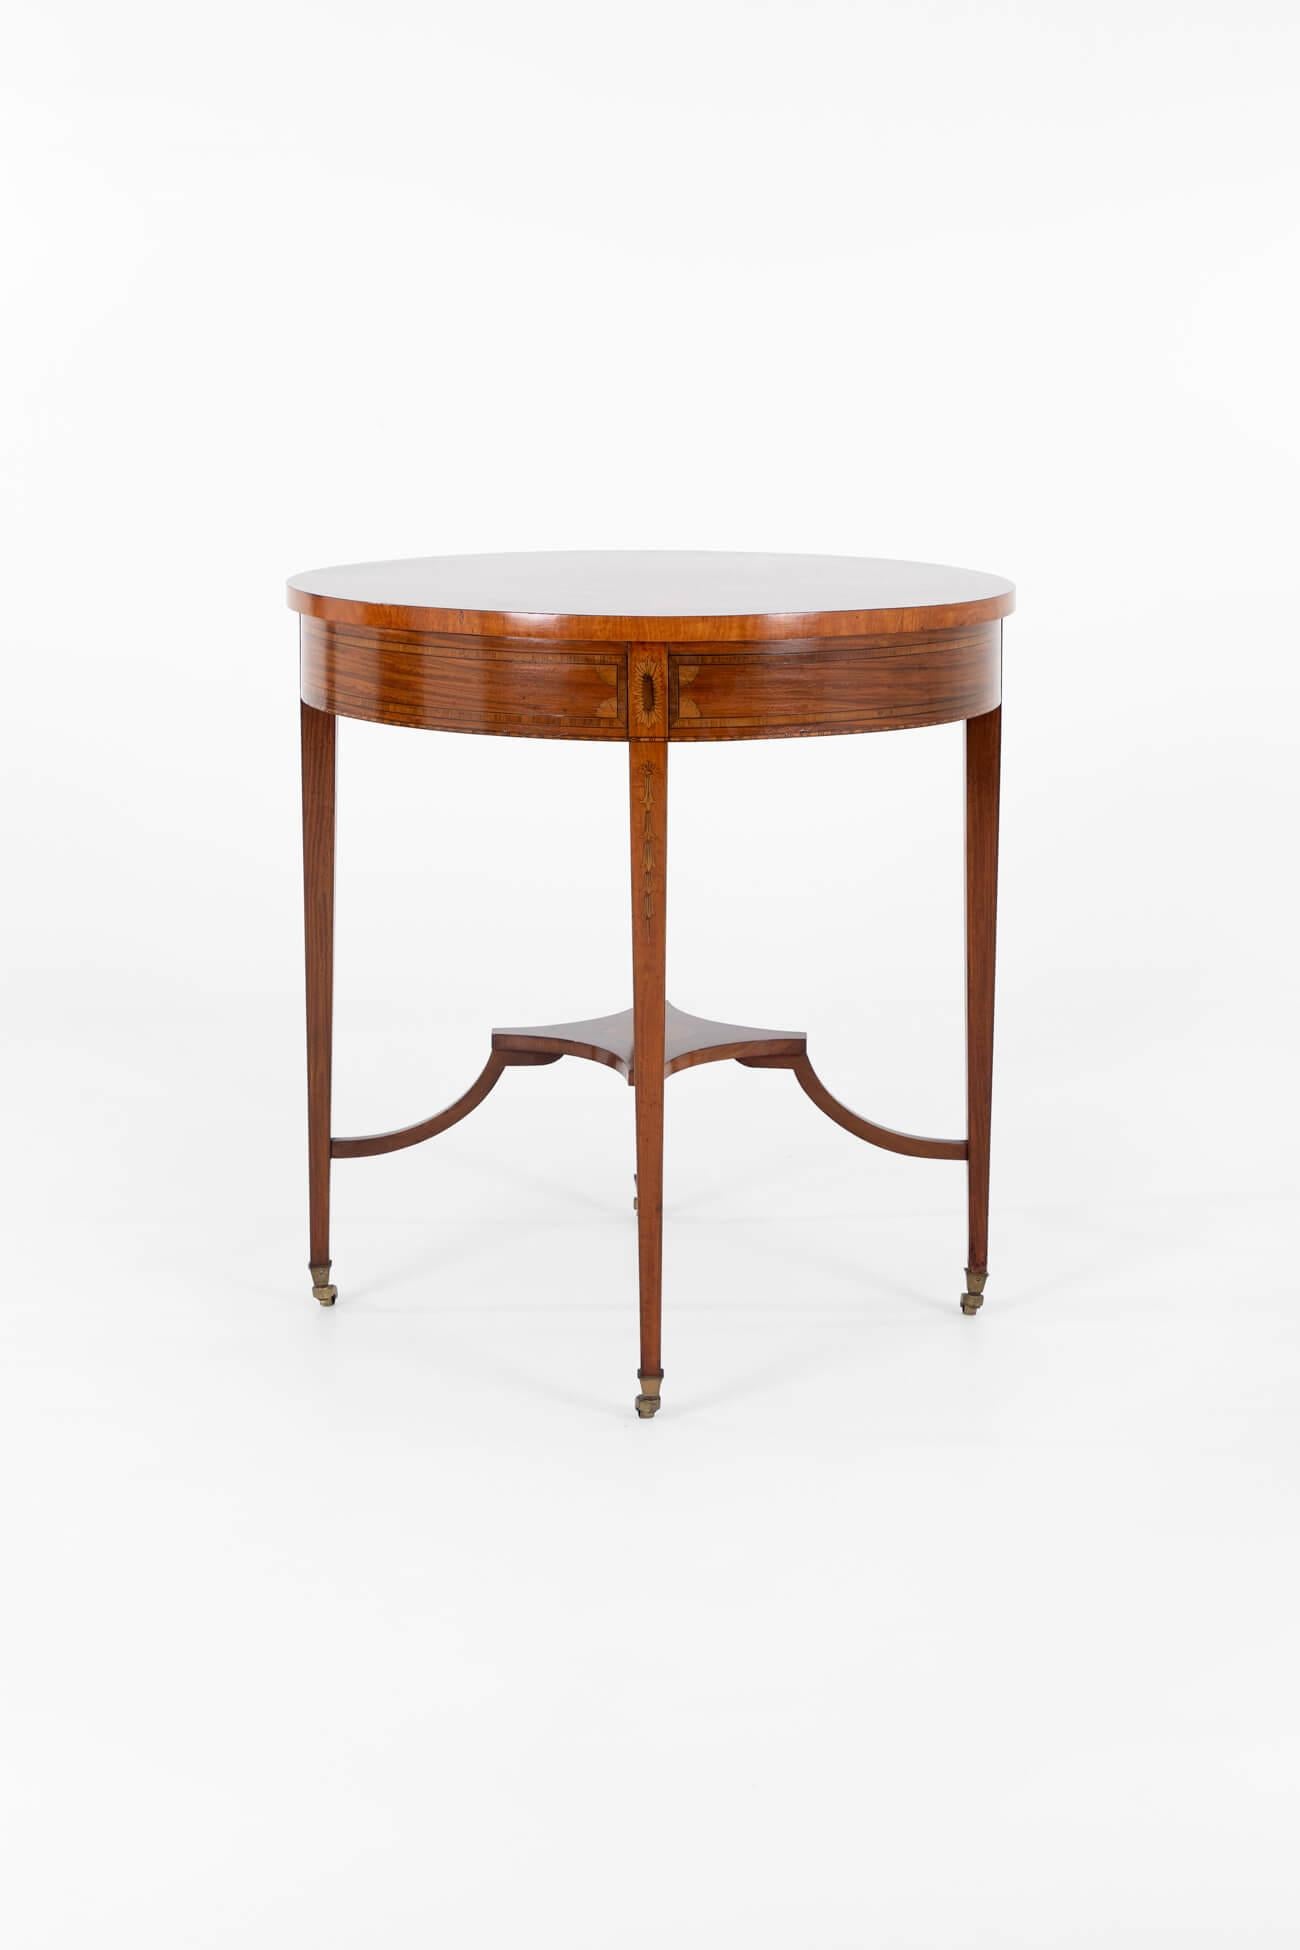 An Edwardian mahogany and marquetry occasional table with square block legs raised on original brass castors.

The legs are united by a cross stretcher with detailed marquetry inlays and conforming decoration.

The circular marquetry inlaid top is